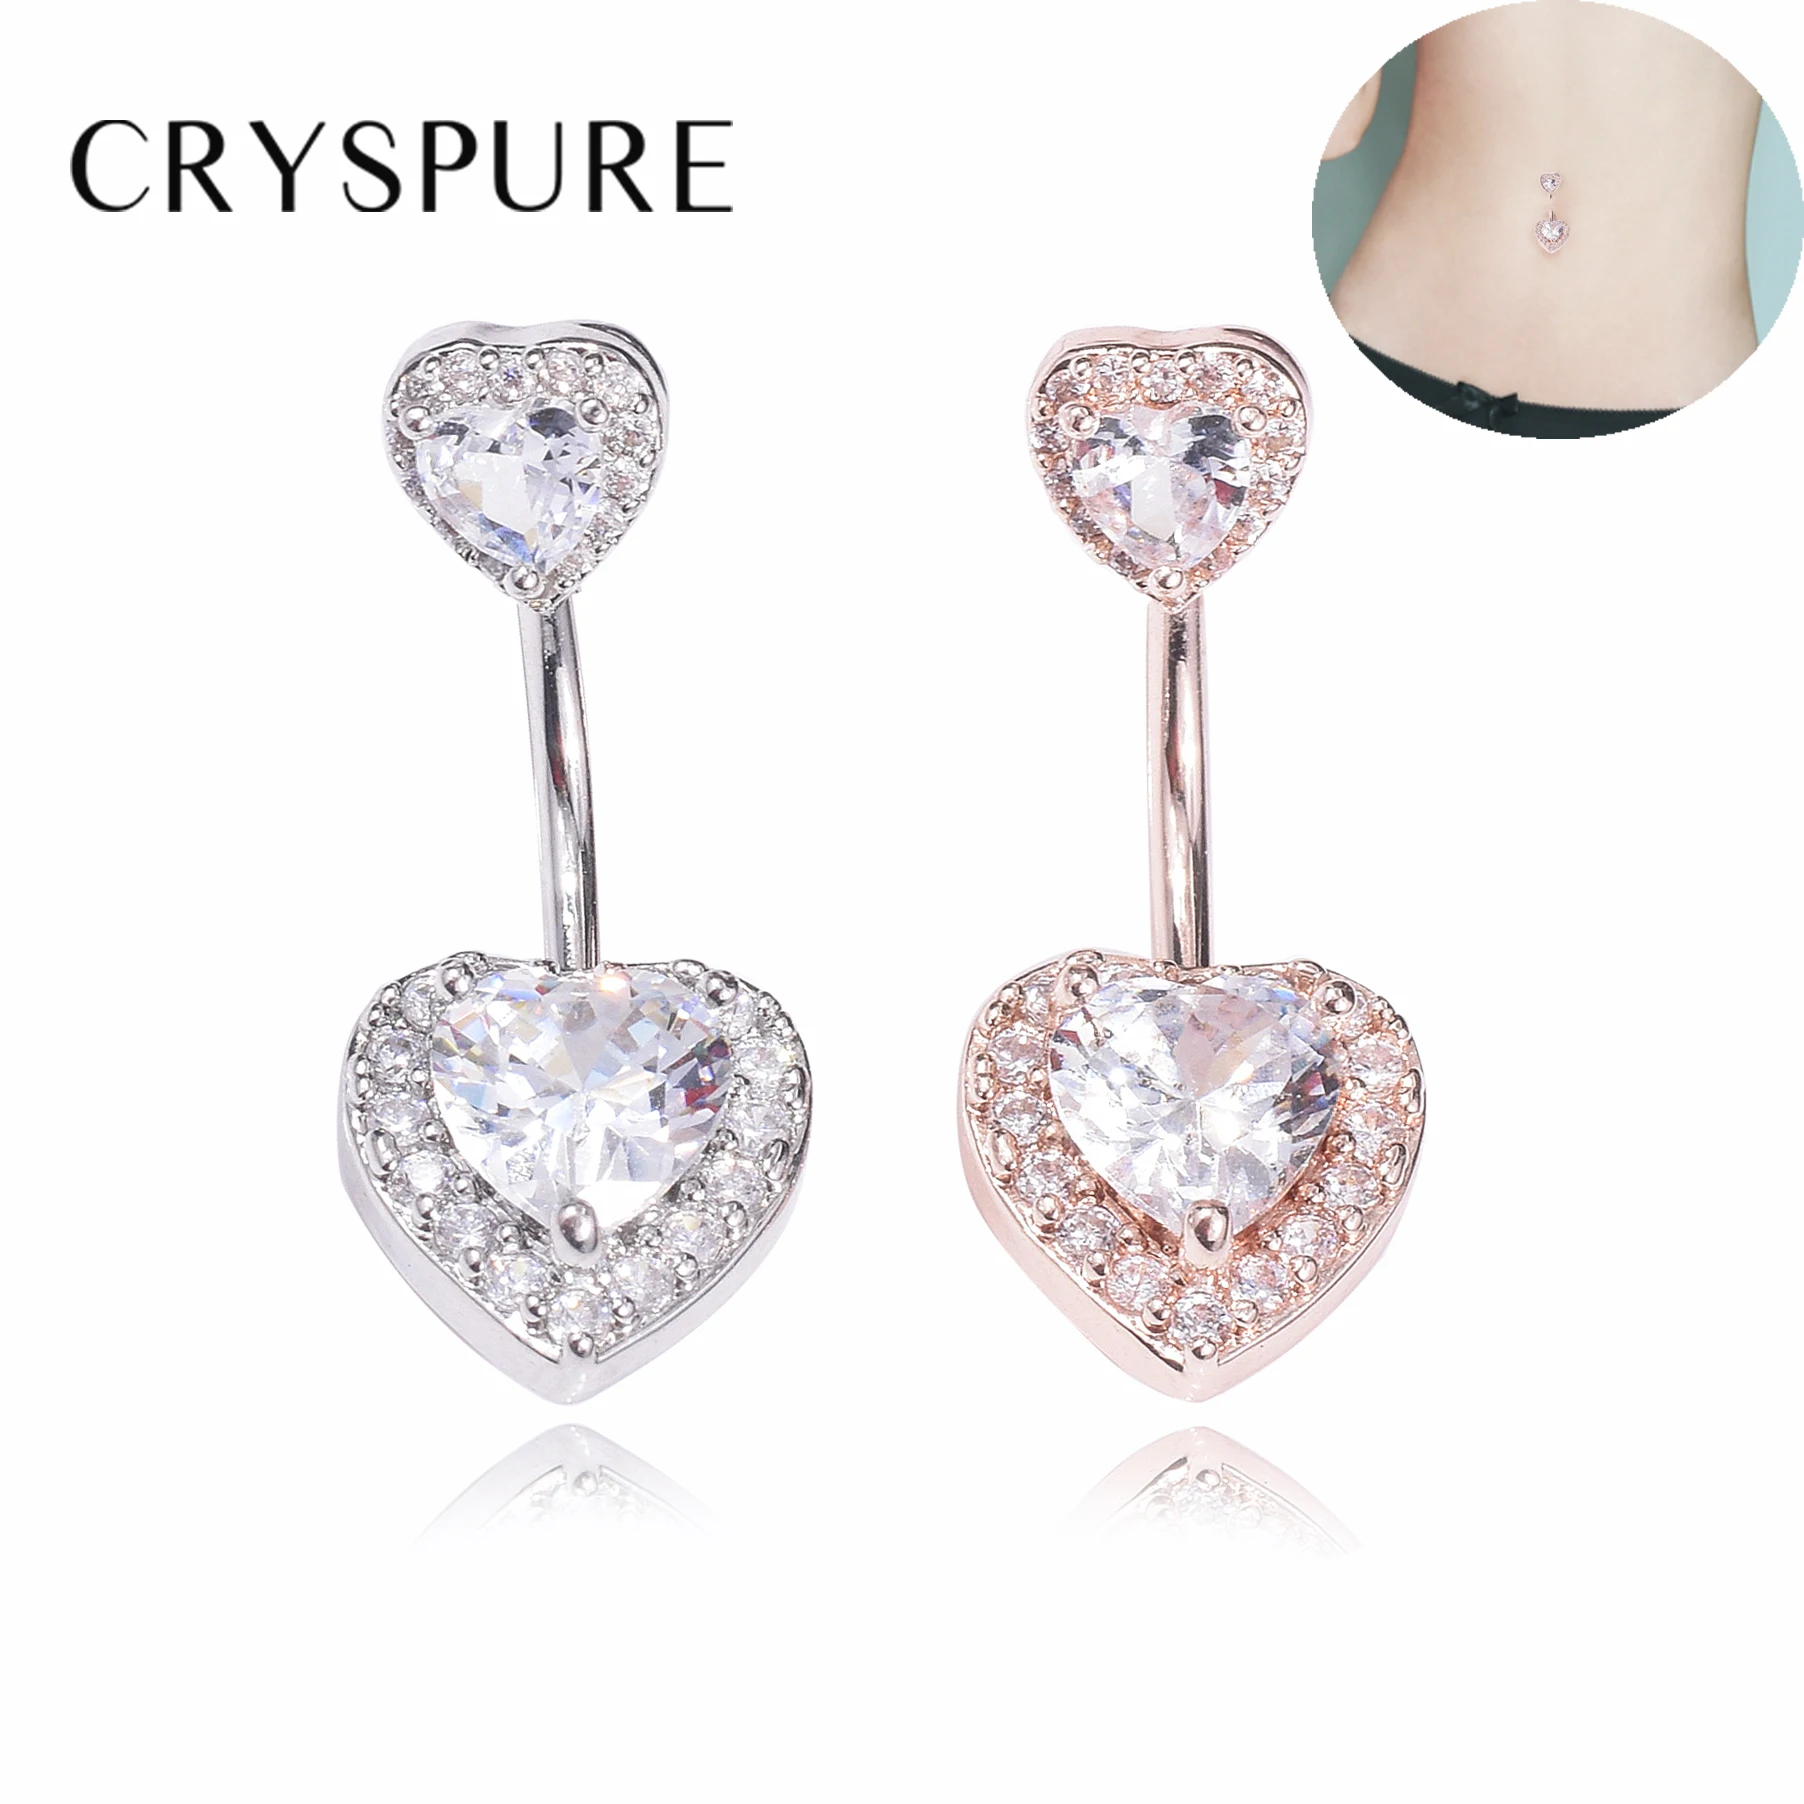 

stainless Steel Dangle Navel Rings Crystal Women Navel Bars Fashion Double Peach Heart Belly Button Ring Piercing Body Jewelry